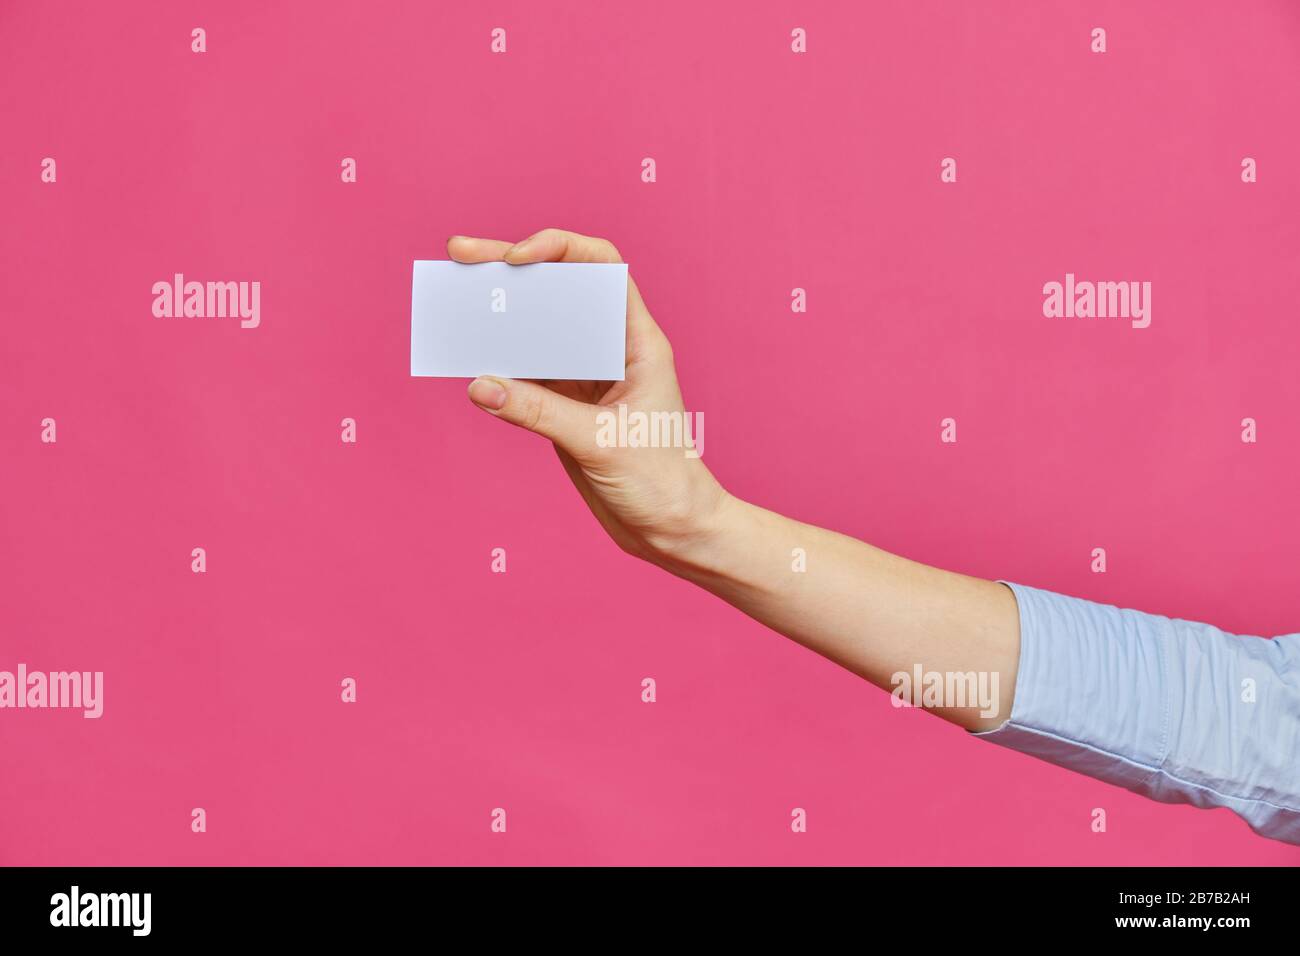 Female outstretched hand shows a white card on a pink background. Copy space. Close up. Stock Photo